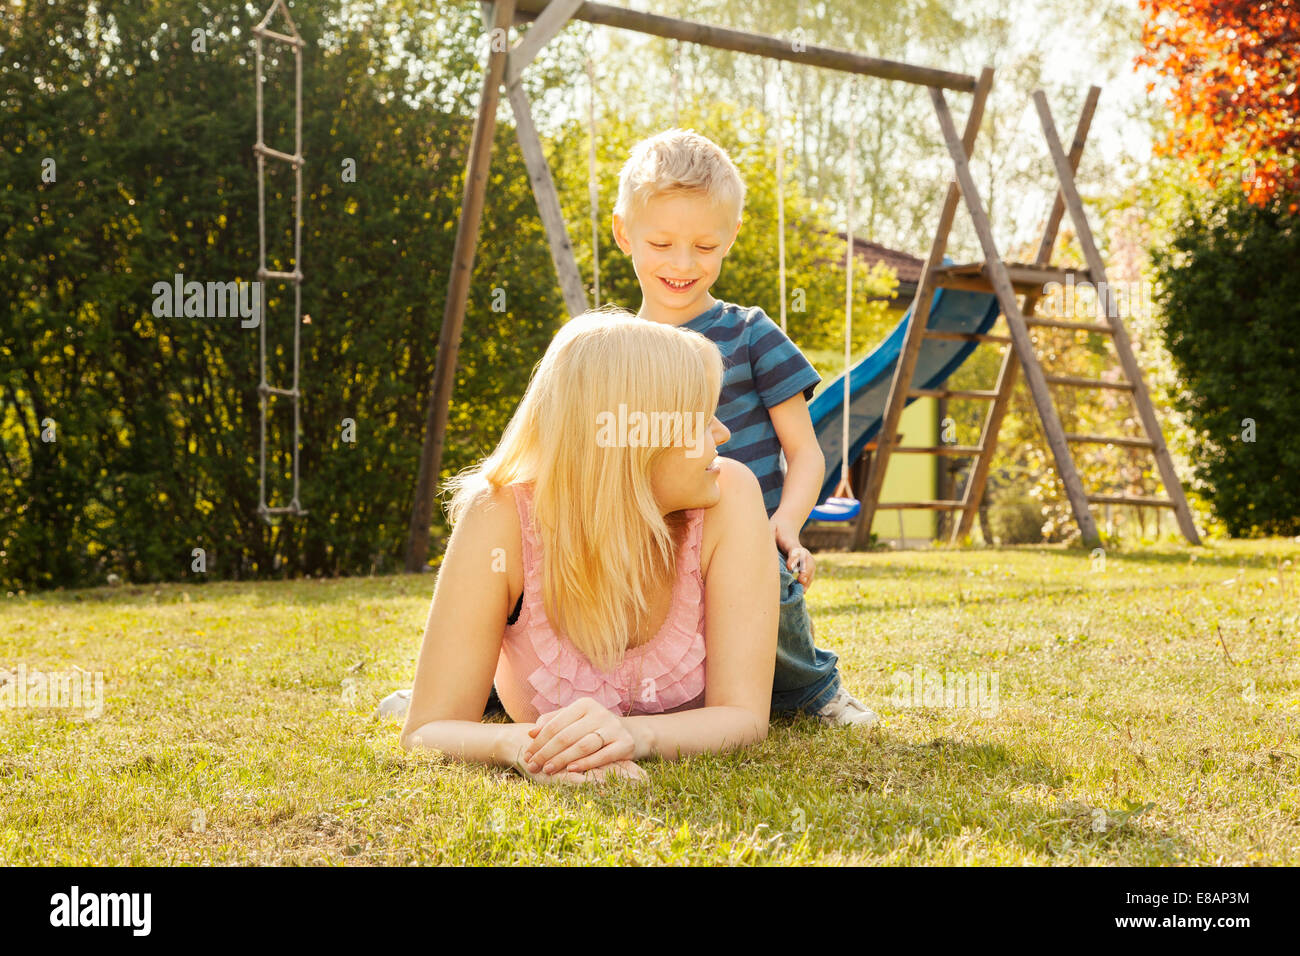 Mother and son in garden, swings in background Stock Photo